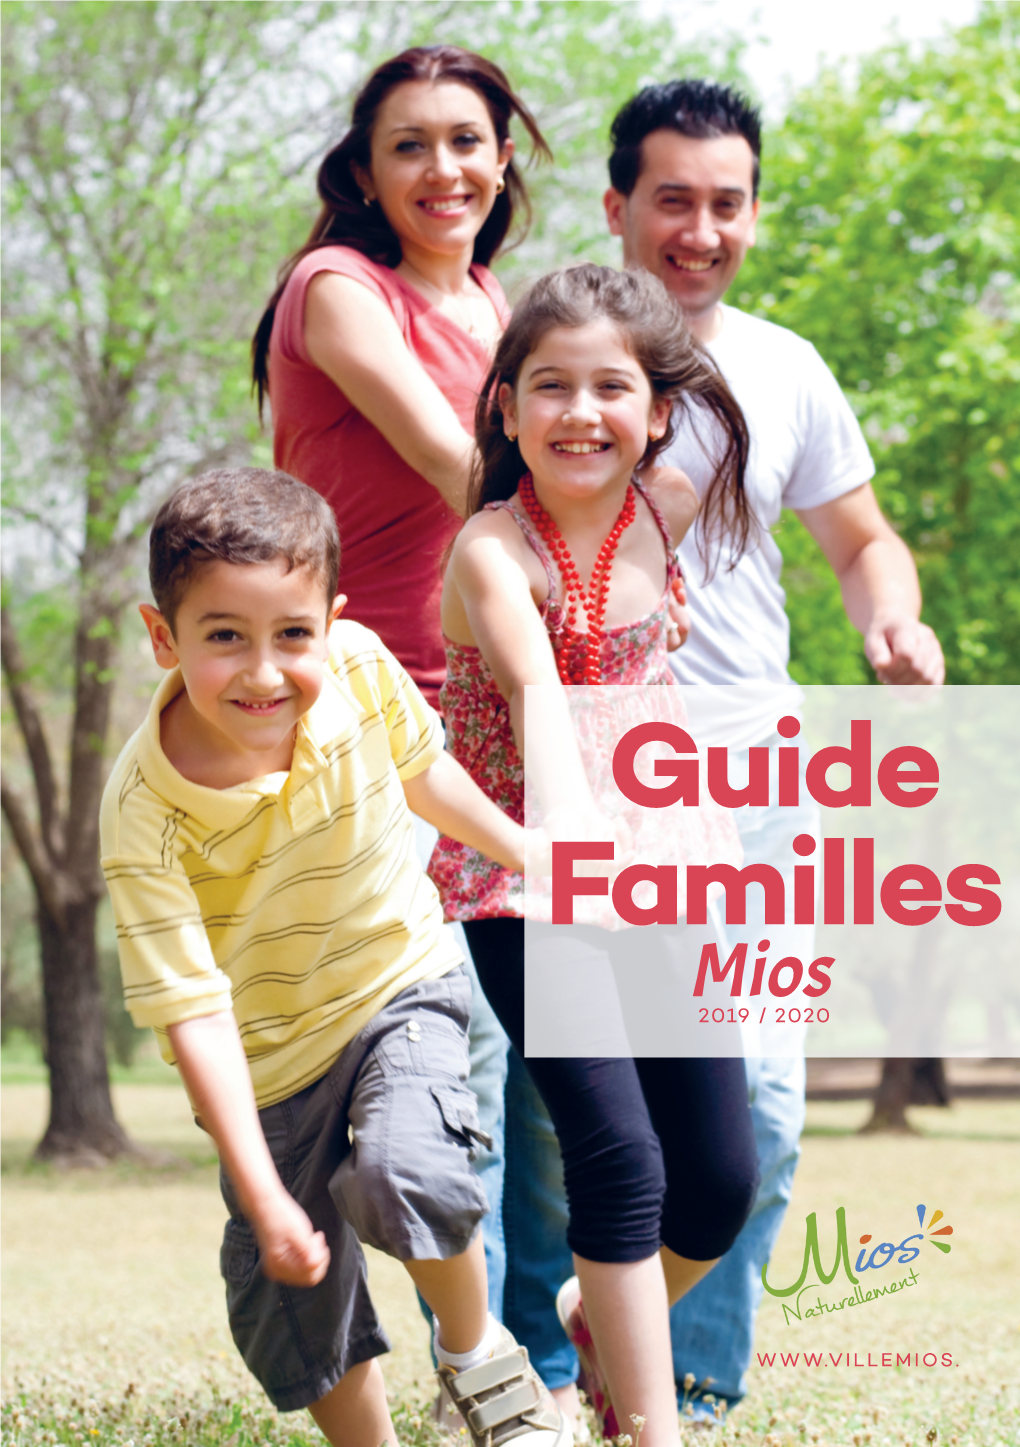 Guide Familles